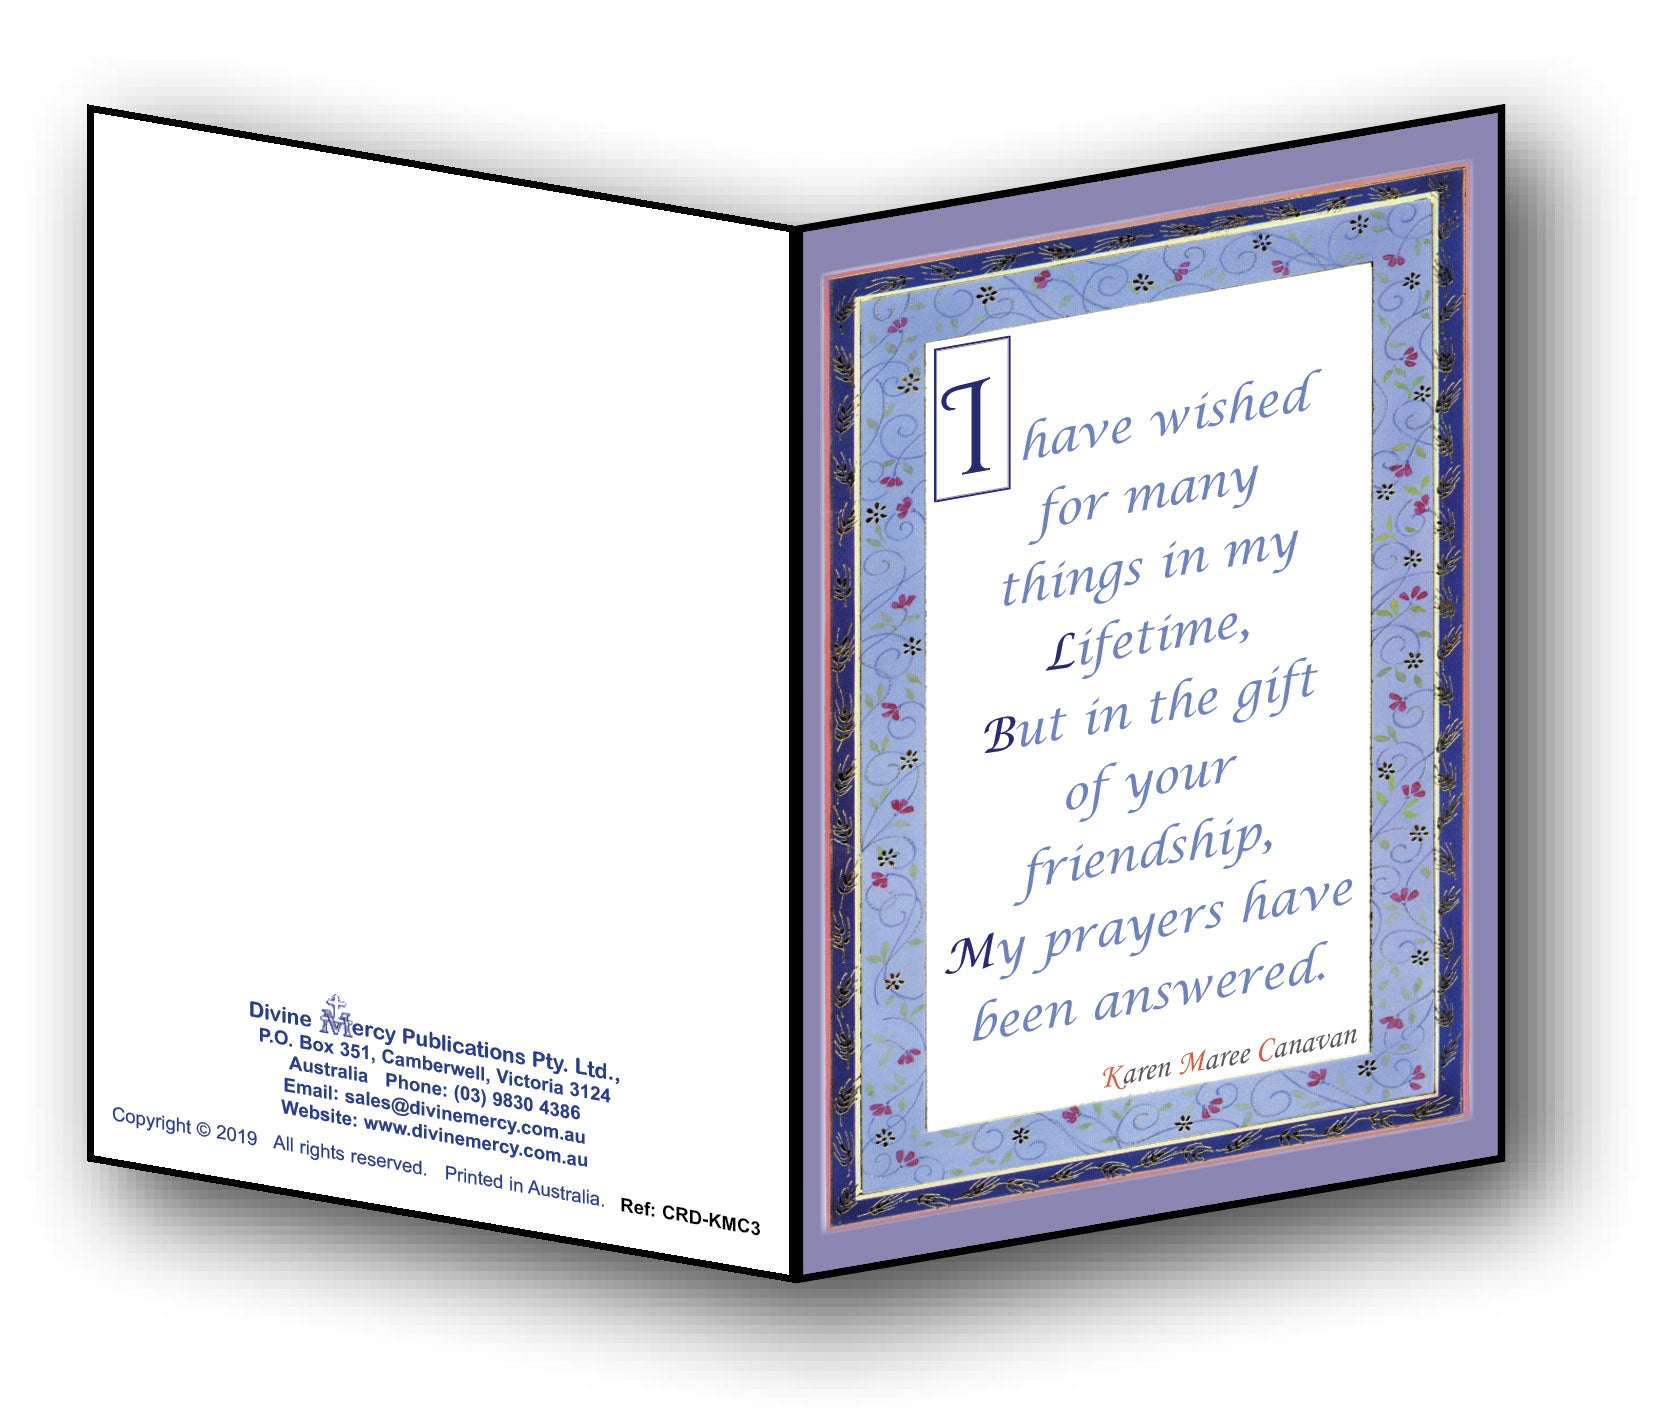 The Gift of Your Friendship Greeting Card